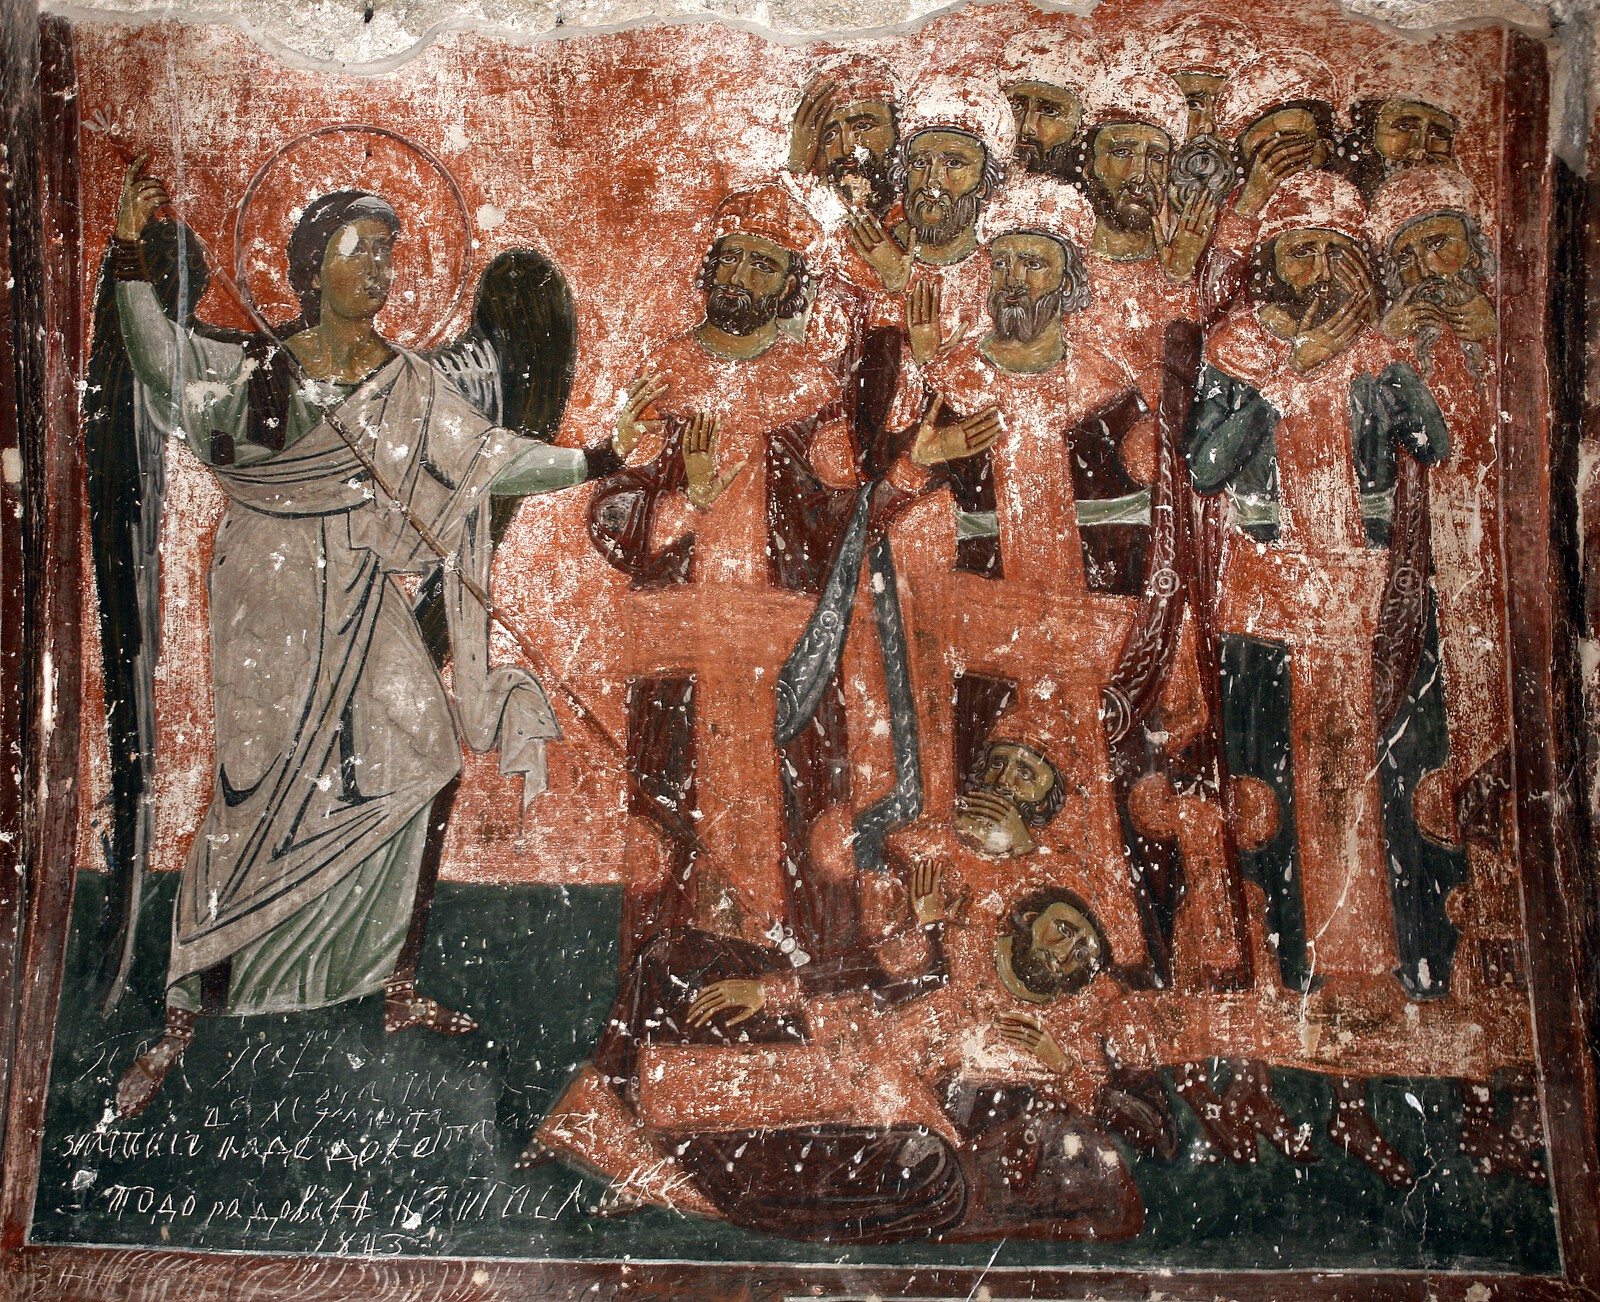 The Last Judgement, detail, between 1234 and 1236